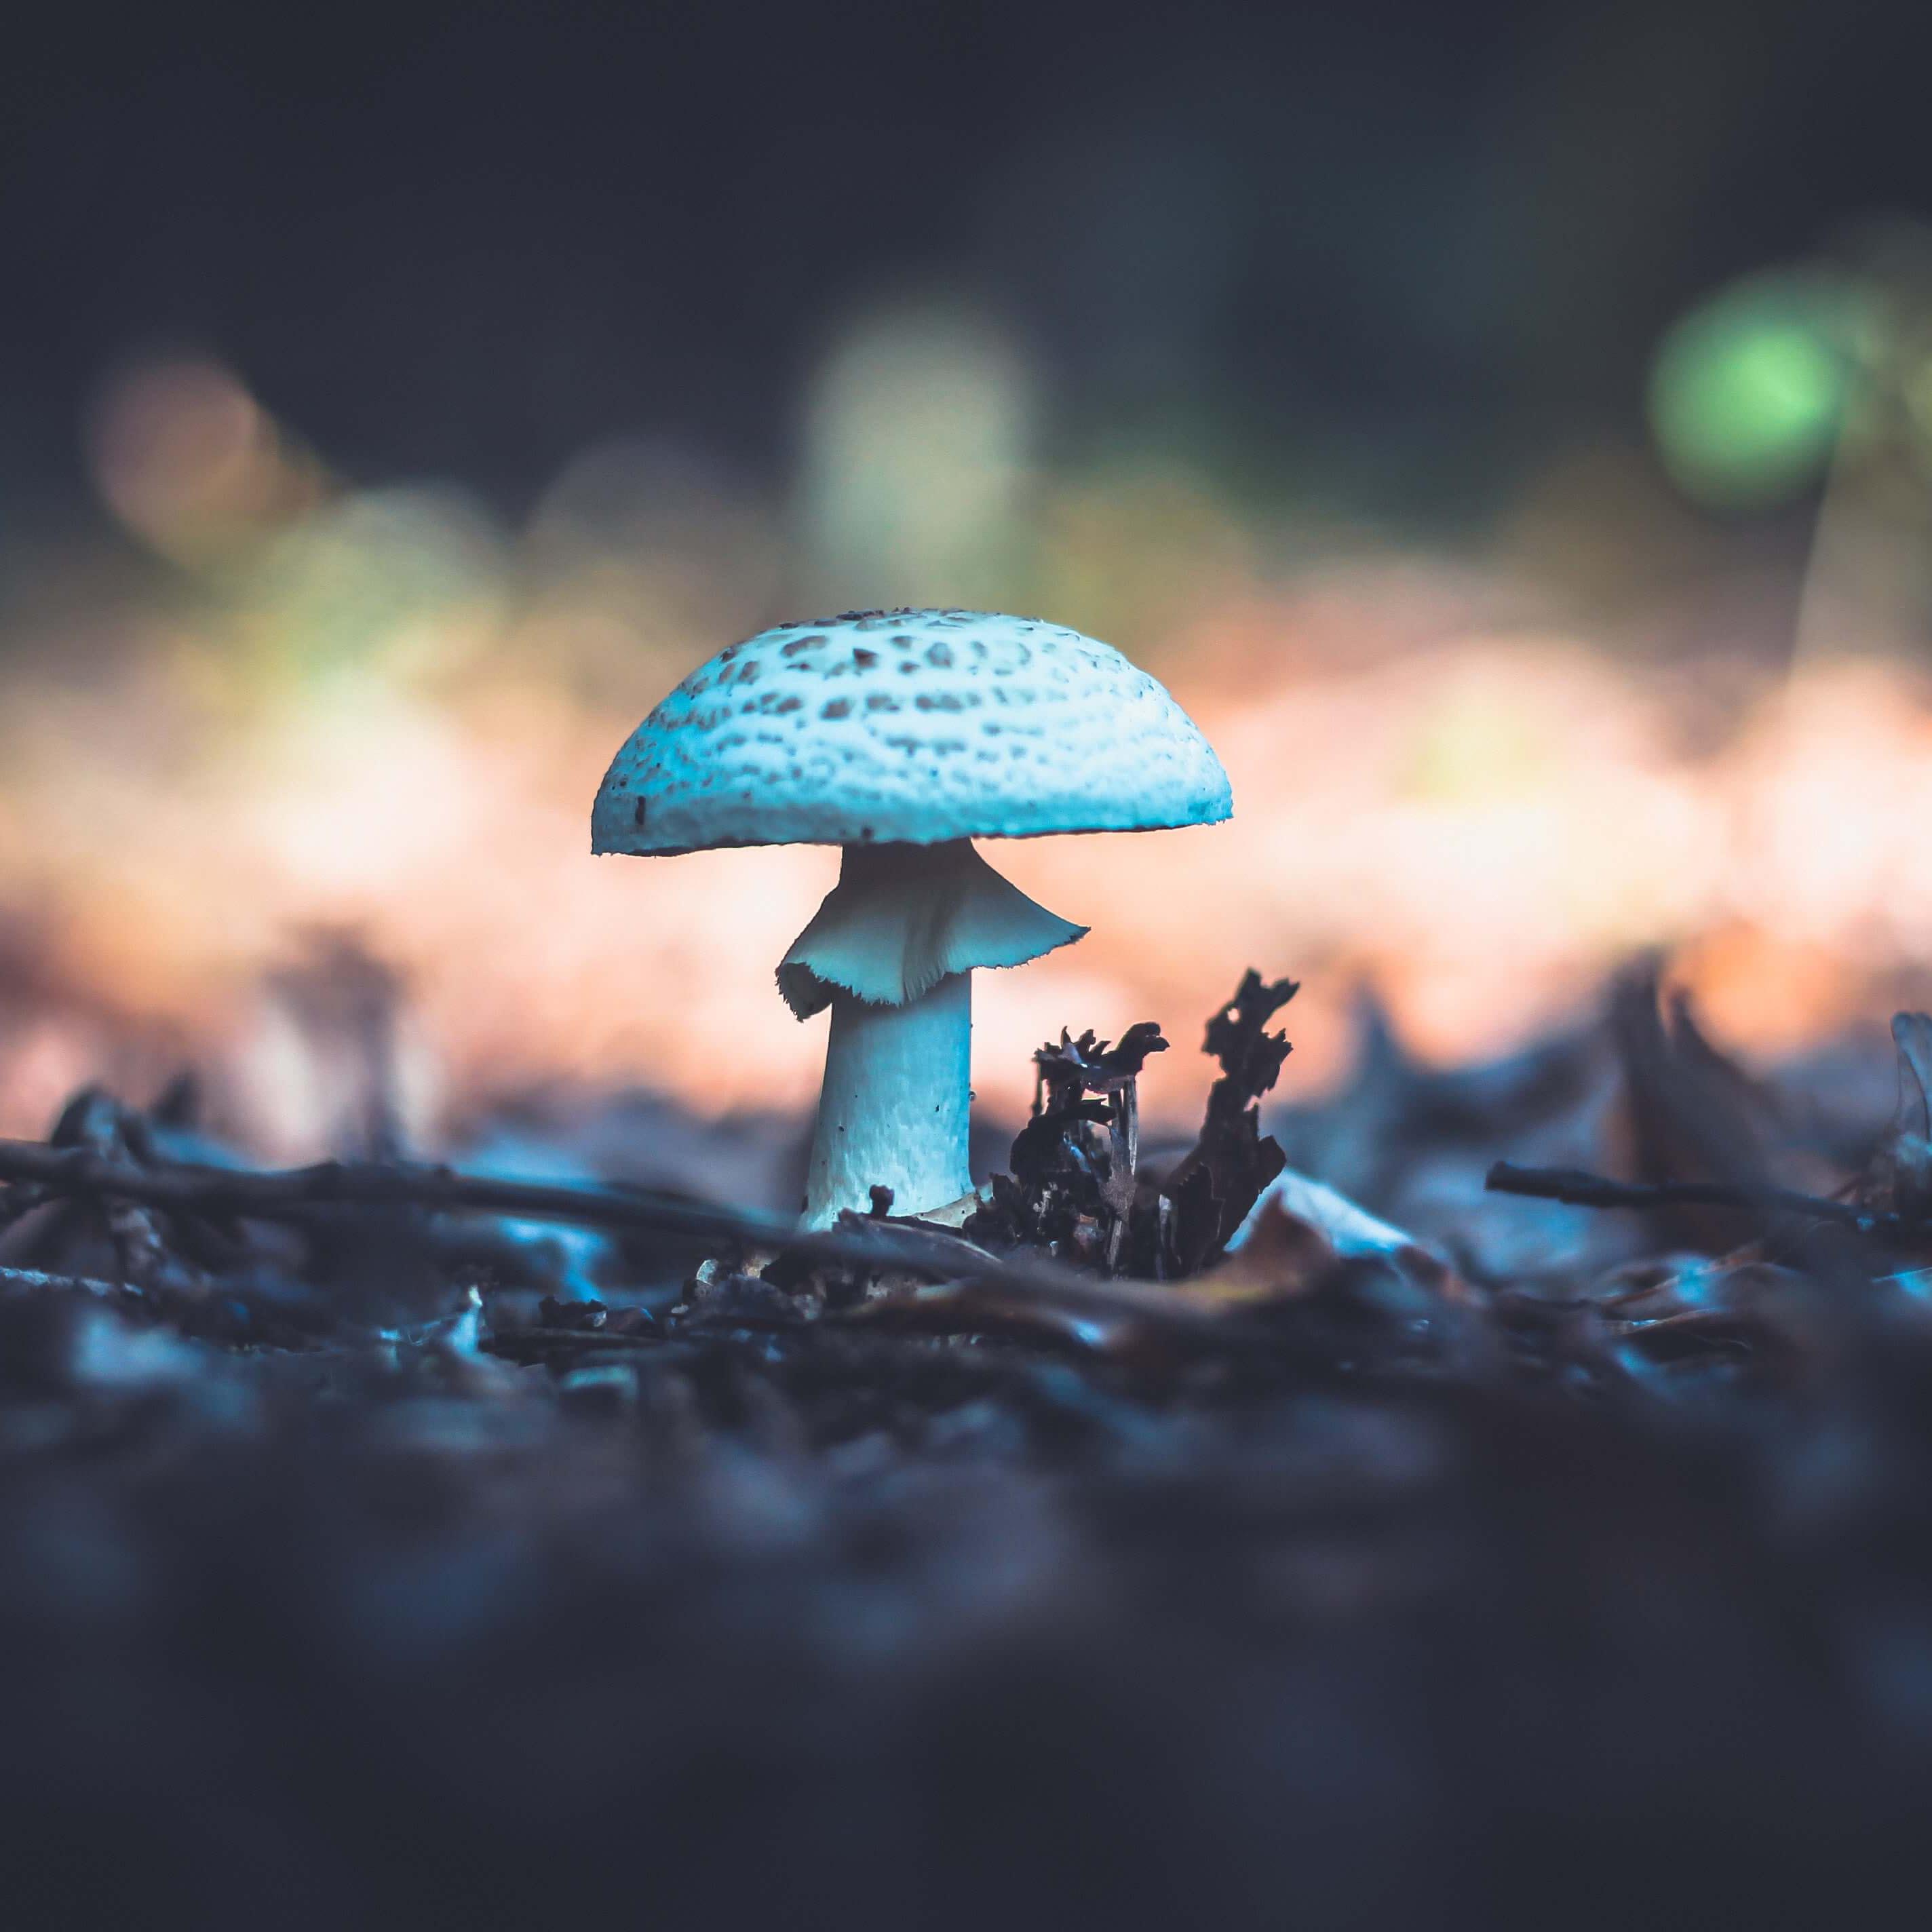 Image of a lone white mushroom on a forest floor